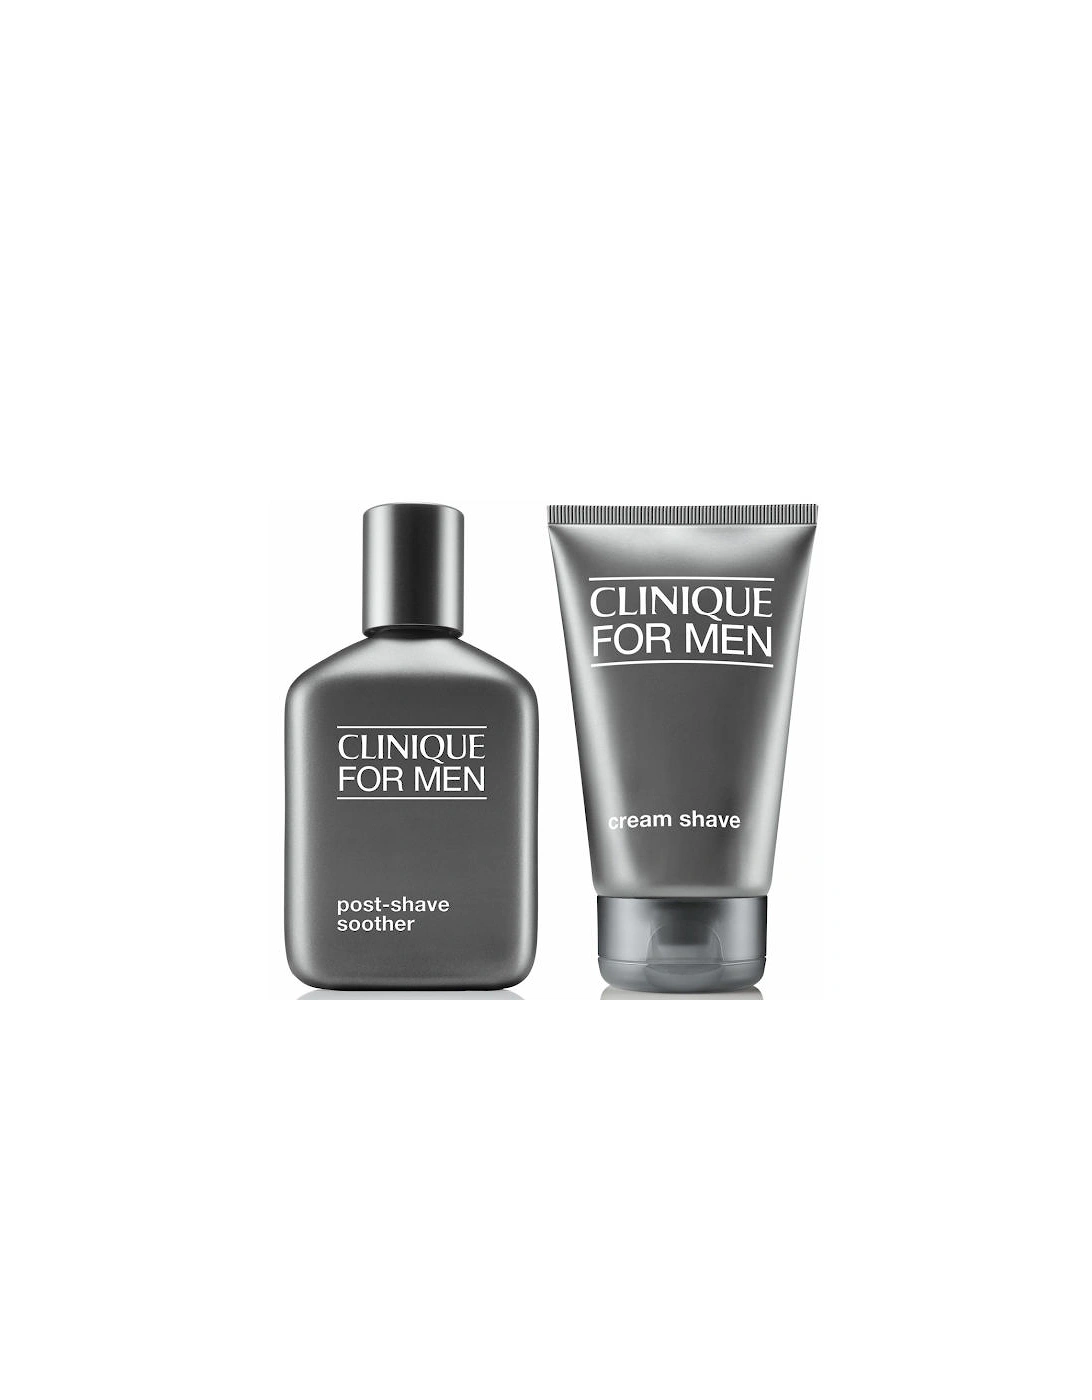 For Men Cream Shave and Post-Shave Soother (Bundle), 2 of 1